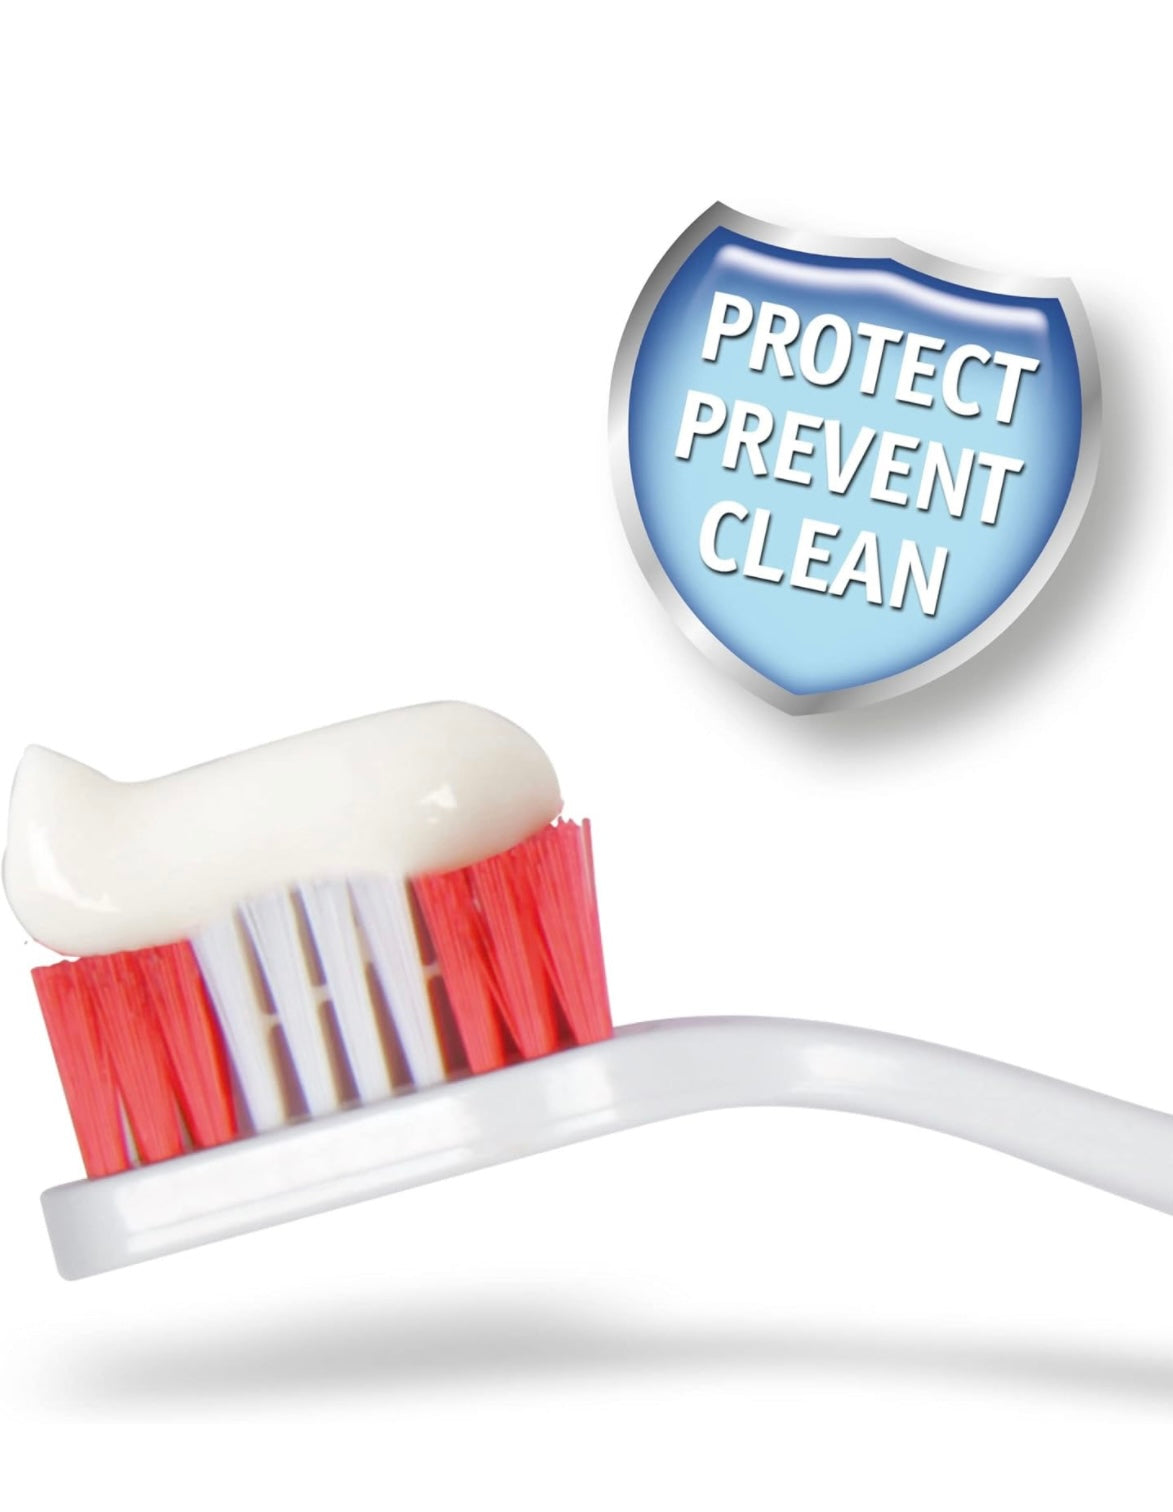 Toothbrush & Toothpaste Dental Care Kit Includes a Double-Ended Toothbrush & Liver-Flavored Enzymatic Toothpaste